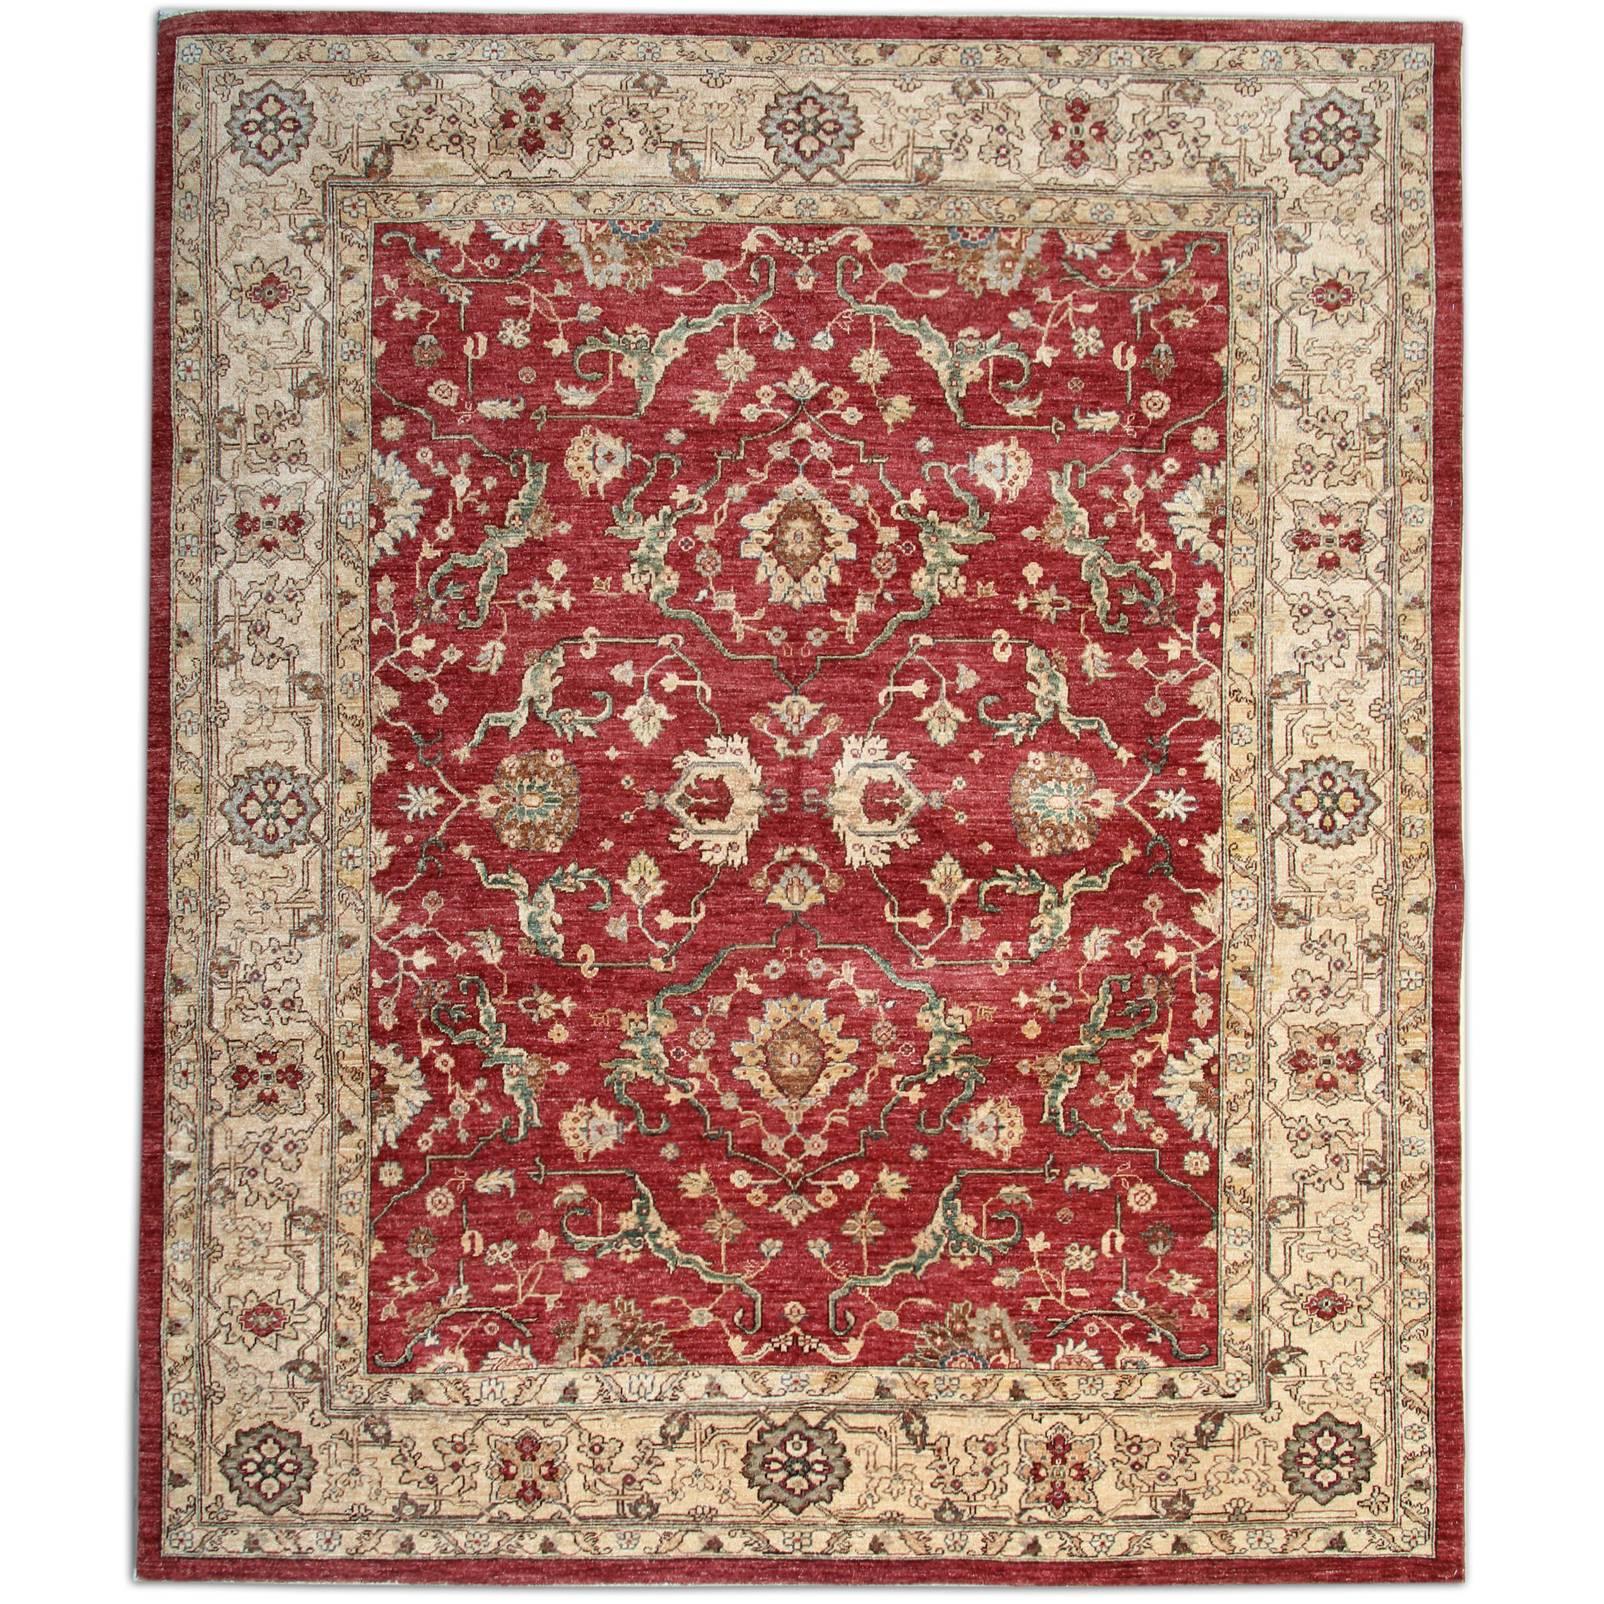 Ziegler Persian Style Rugs, Sultanabad Carpet